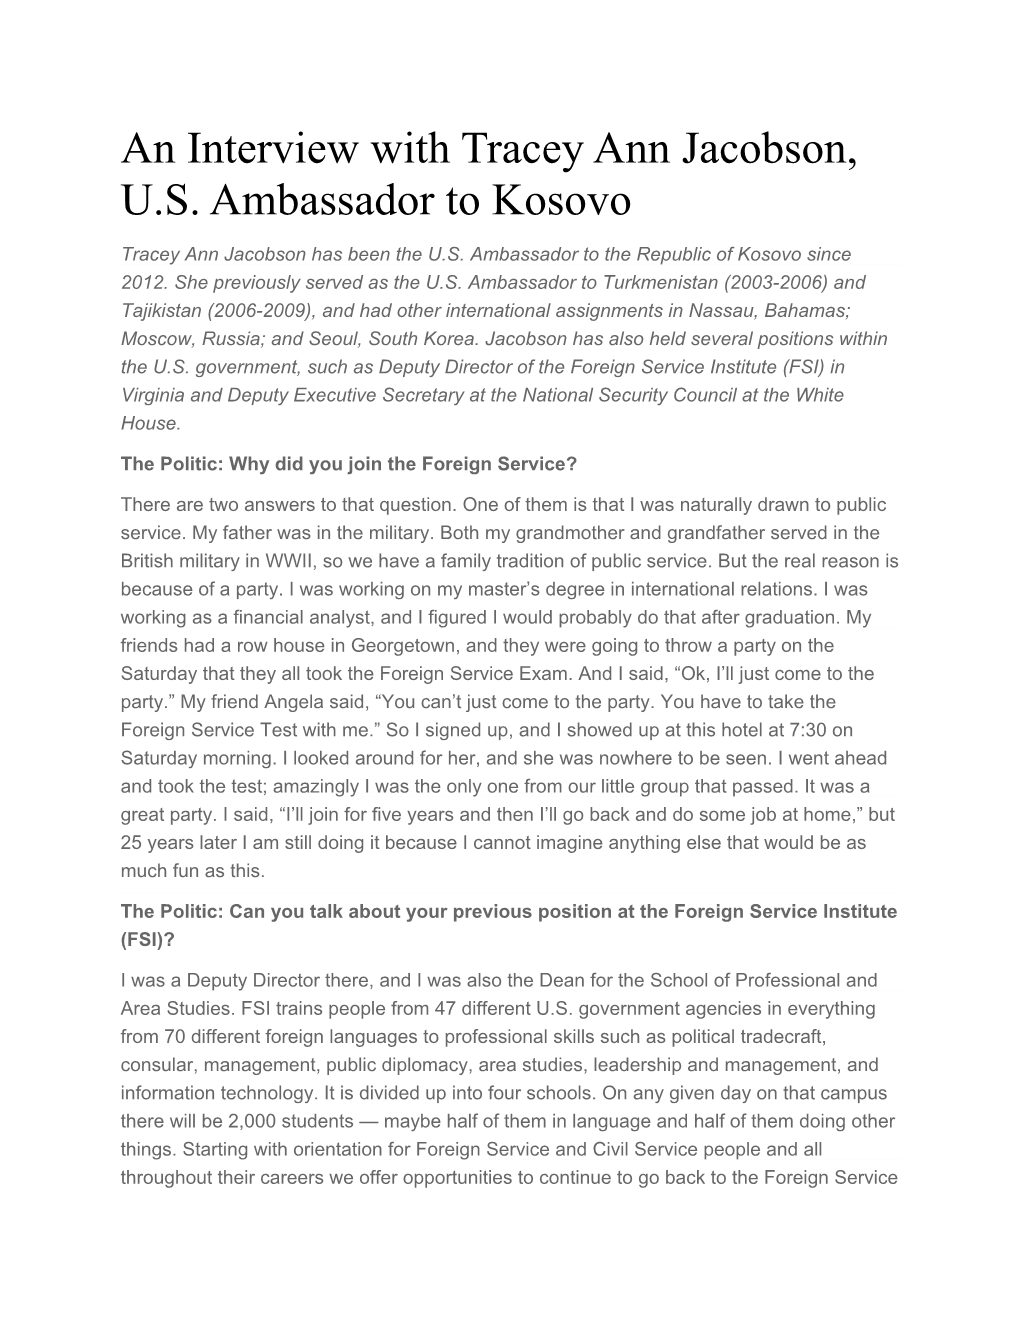 An Interview with Tracey Ann Jacobson, U.S. Ambassador to Kosovo